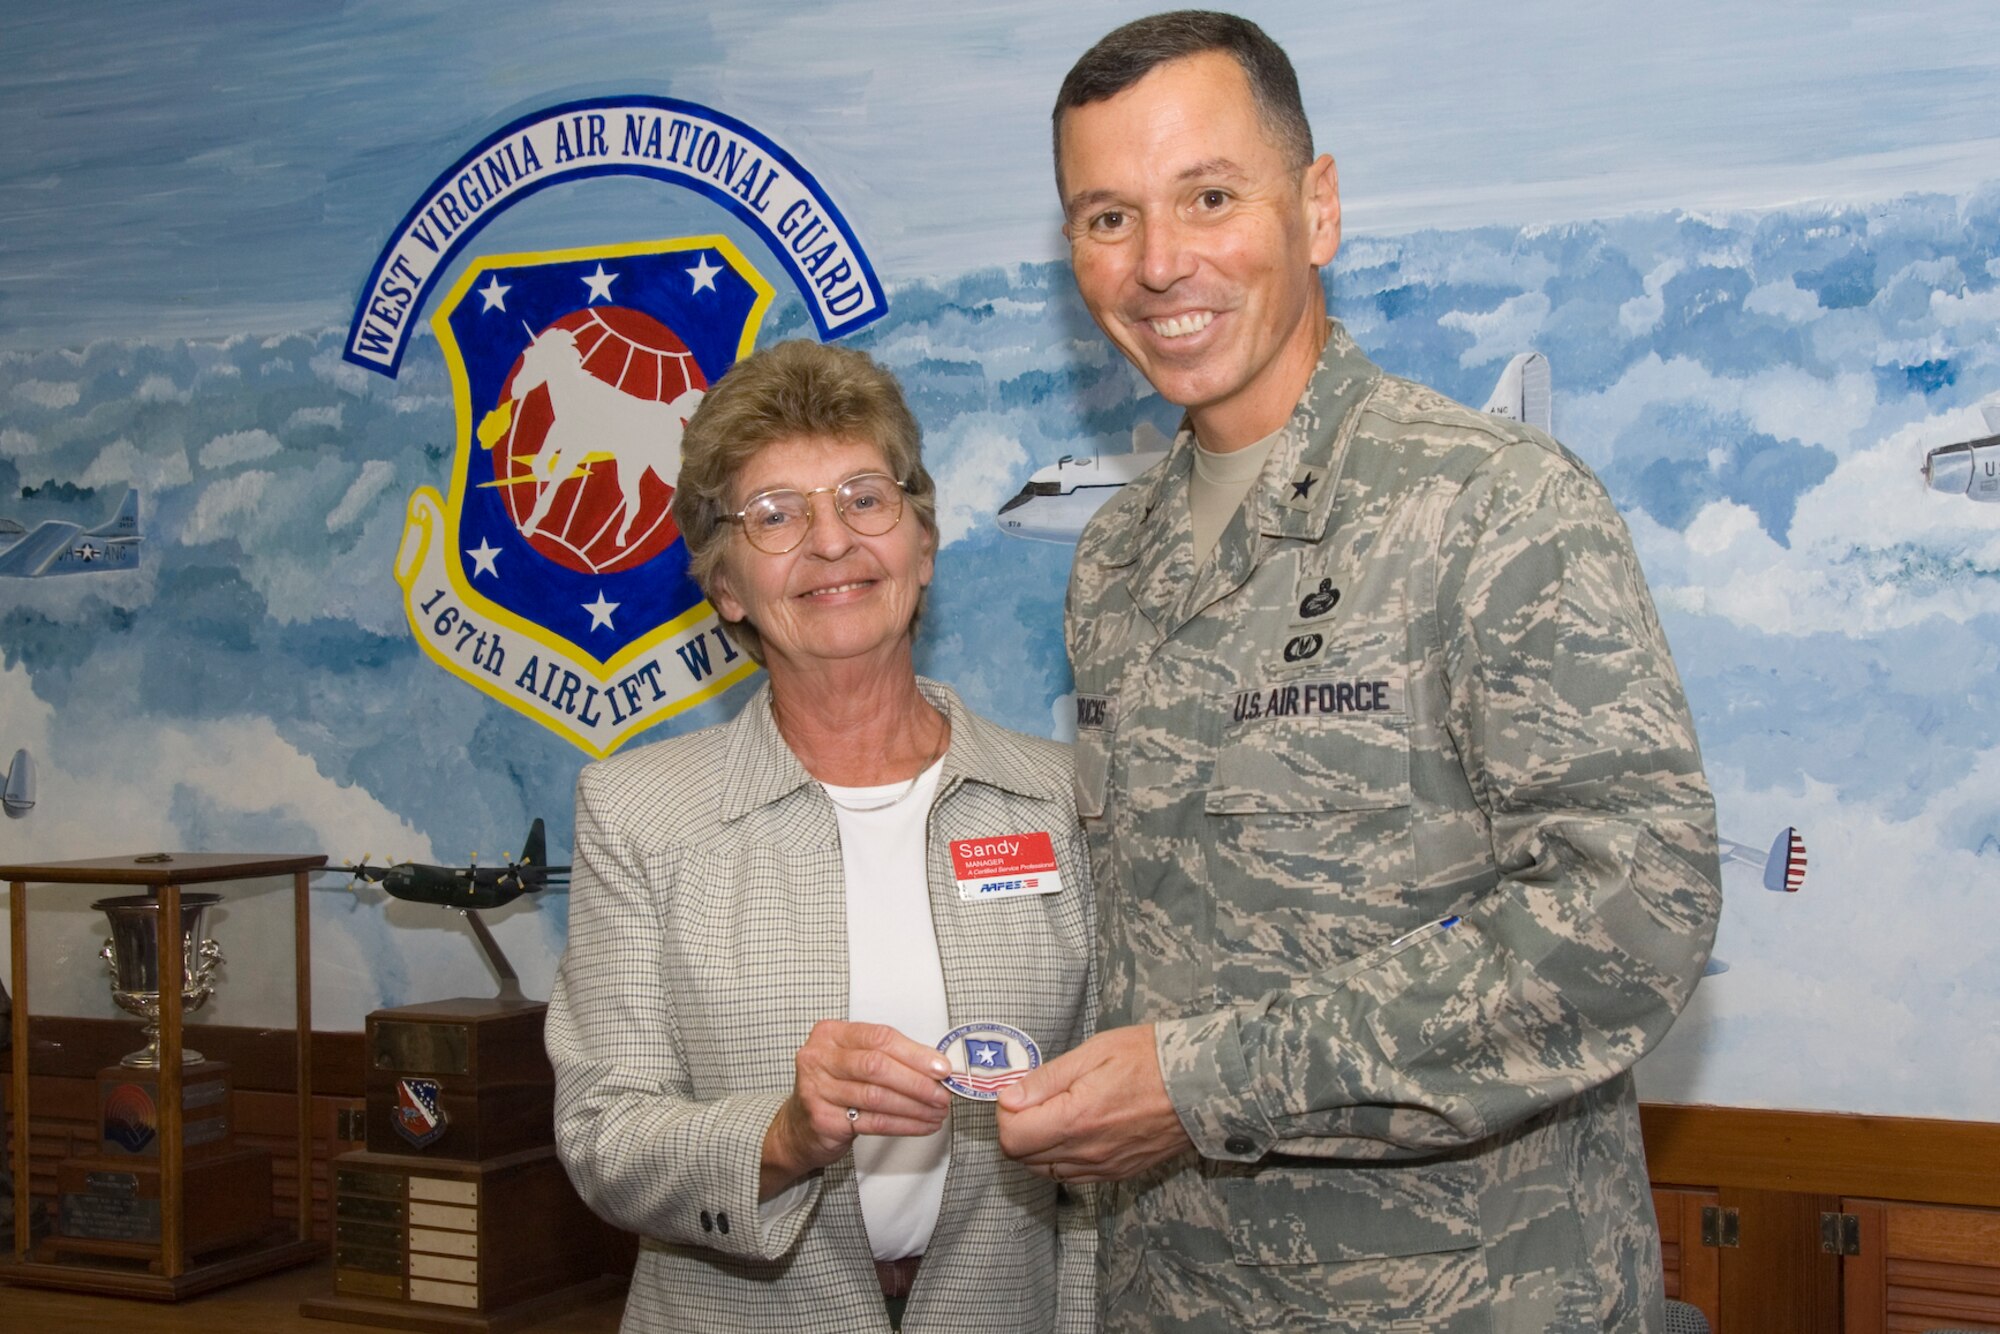 Mrs. Sandy Chrisman, 167th Airlift Wing Shoppette Manager, is presented with Brig. General Fran L. Hendricks' Coin of Excellence. Gen. Hendricks is the Deputy Commanding General for the Army and Air Force Exchange Service (AAFES). His primary reason for visiting the 167th Airlift Wing on Sept. 26 was to ensure that AAFES was providing positive customer service to the Wing and to recognize Mrs. Chrisman for her outstanding performance.